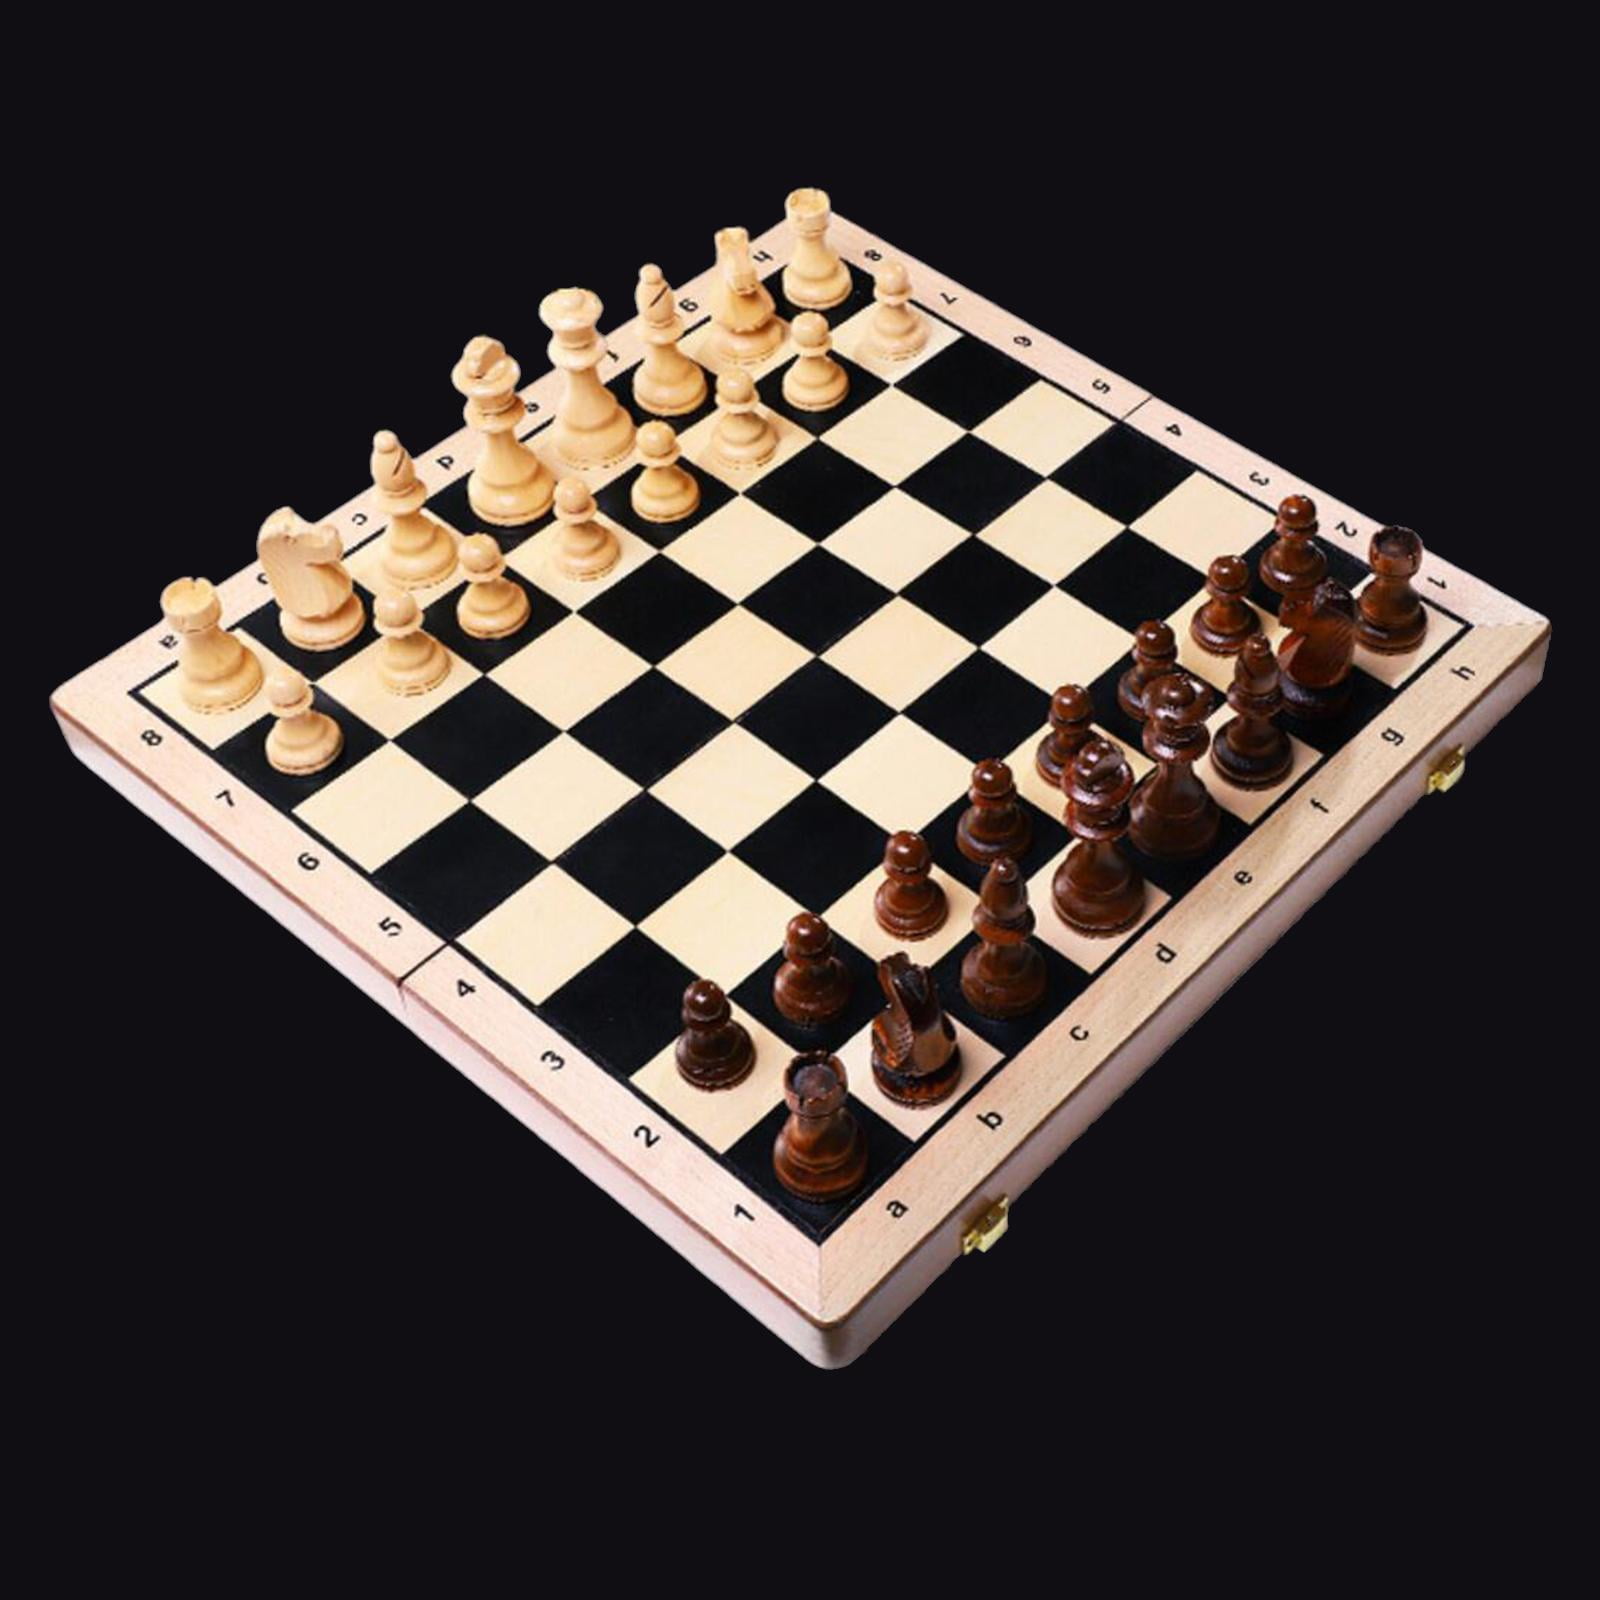  XBSLJ Traditional Games Chess Folding Chess Set Large Metal  Three-Dimensional Chess Pieces Wooden Chess Board (Size : 20.9 in) : Toys &  Games